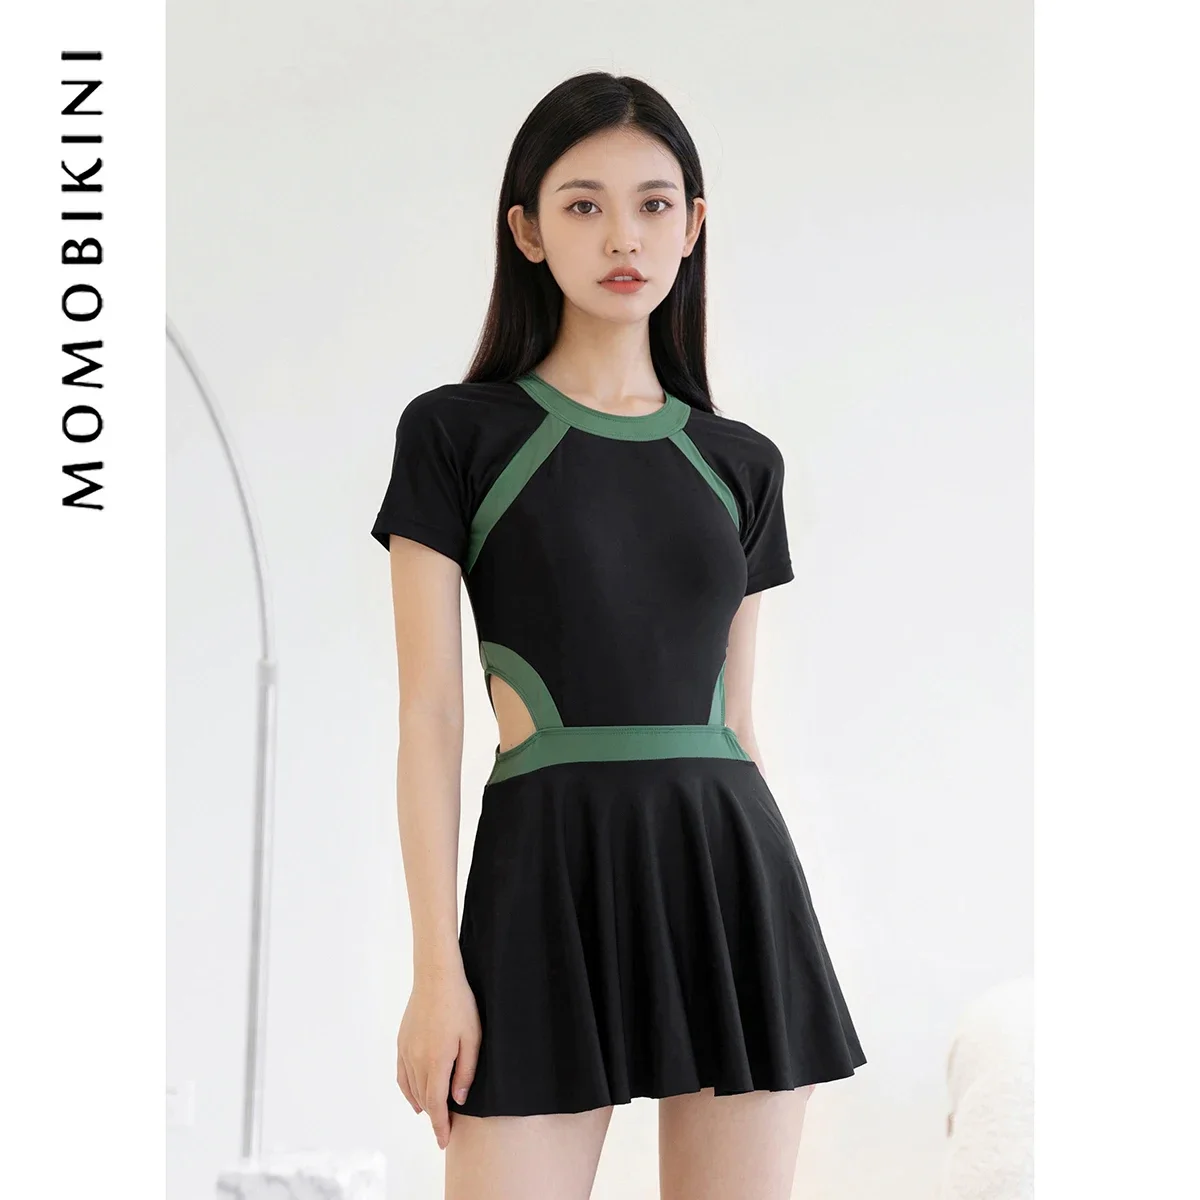 Korean New Sexy One-Piece Skirt Swimsuit Female Black 2021 Covering Belly Thin Conservative Student Hot Spring Swimsuit